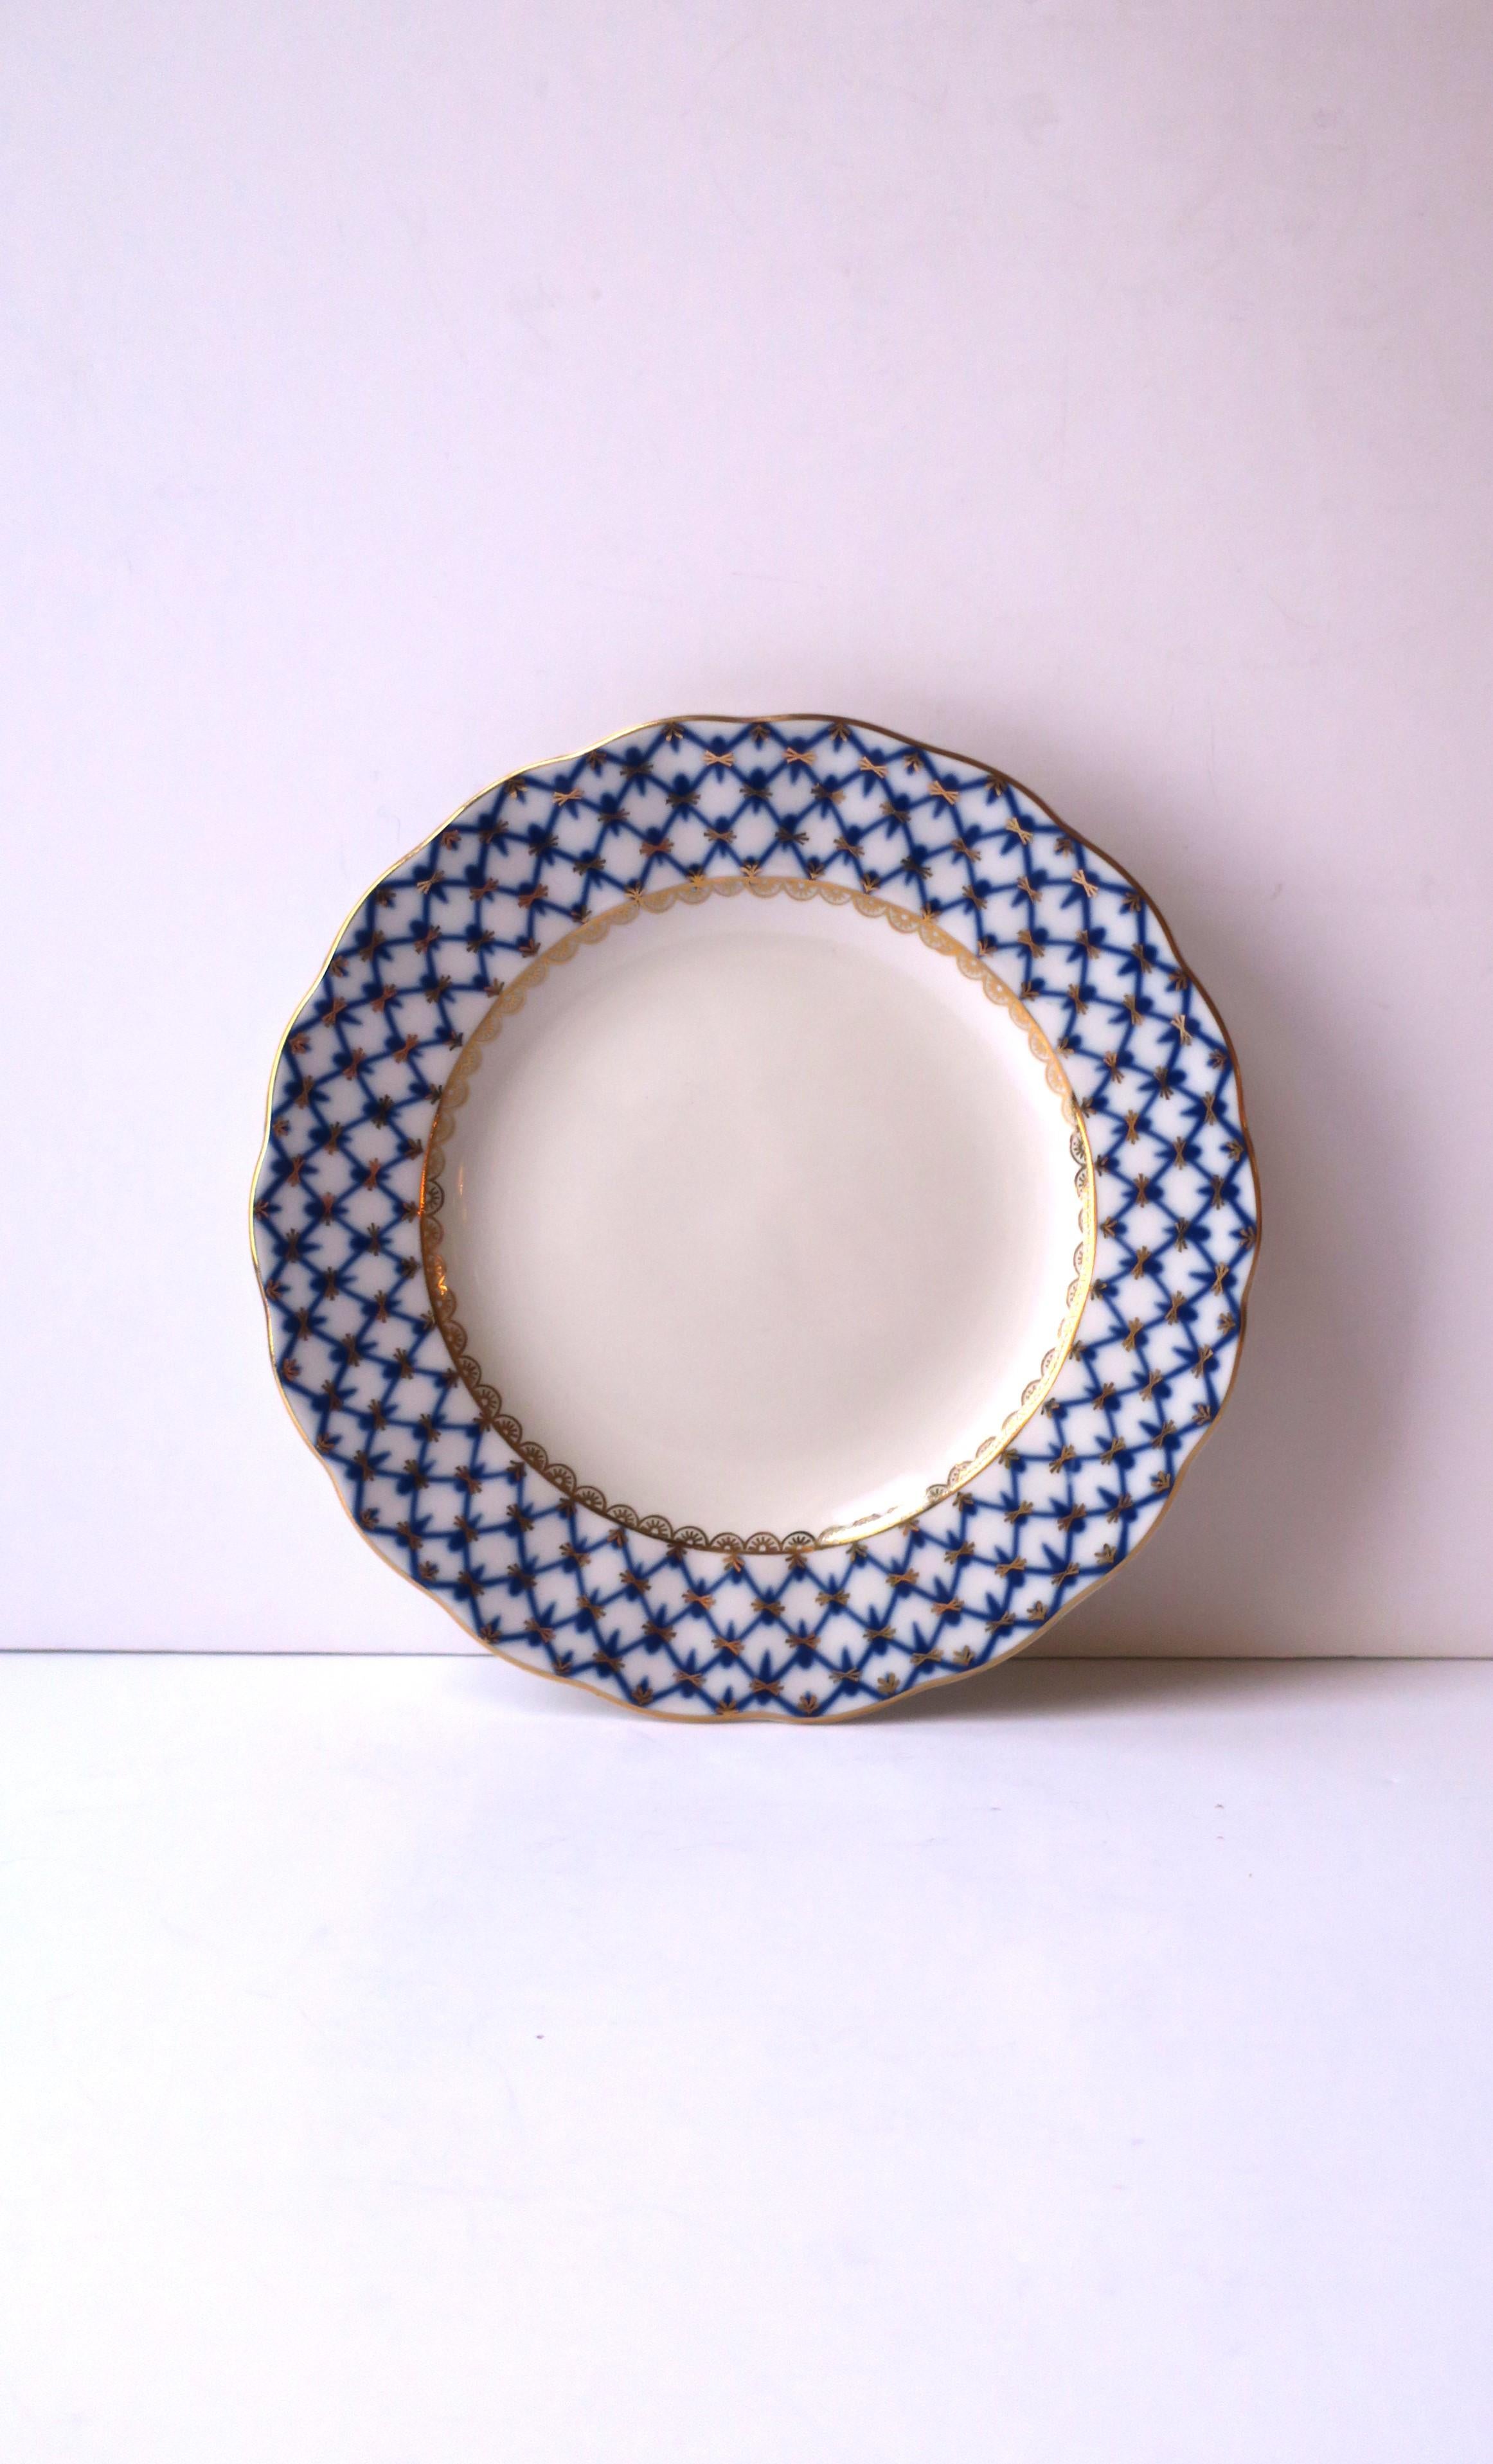 A beautiful Russian blue, gold and white porcelain plate in the 'Cobalt Net' pattern by Lomonosov Porcelain, Russia, circa late-20th century, after 1991. With makers' mark and marked 'Made in Russia' on bottom as shown in last. Dimensions: .88